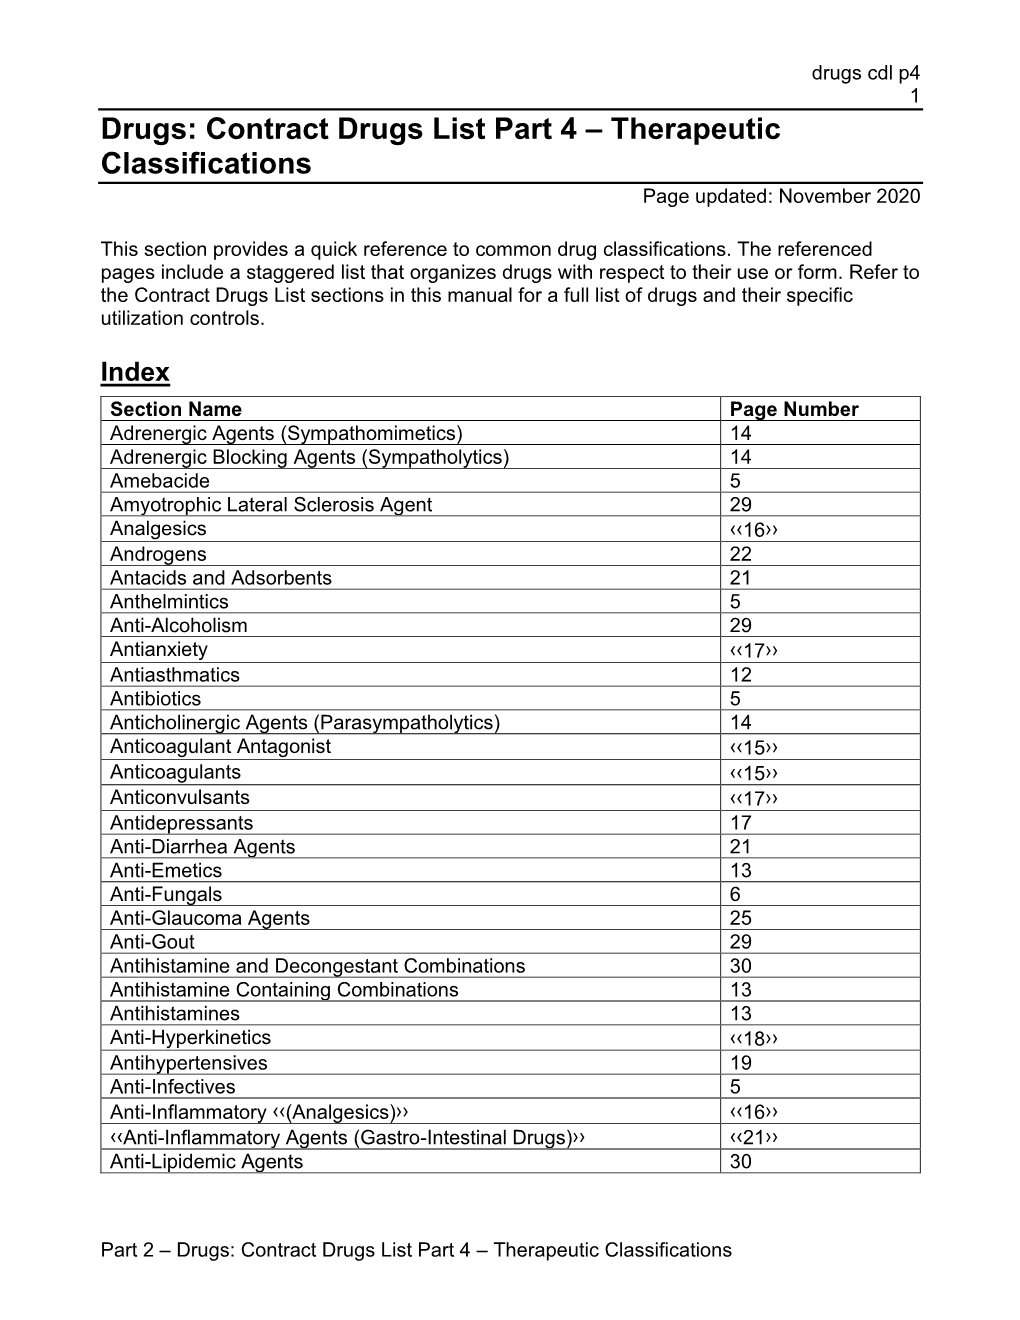 Contract Drugs List Part 4 – Therapeutic Classifications Page Updated: November 2020